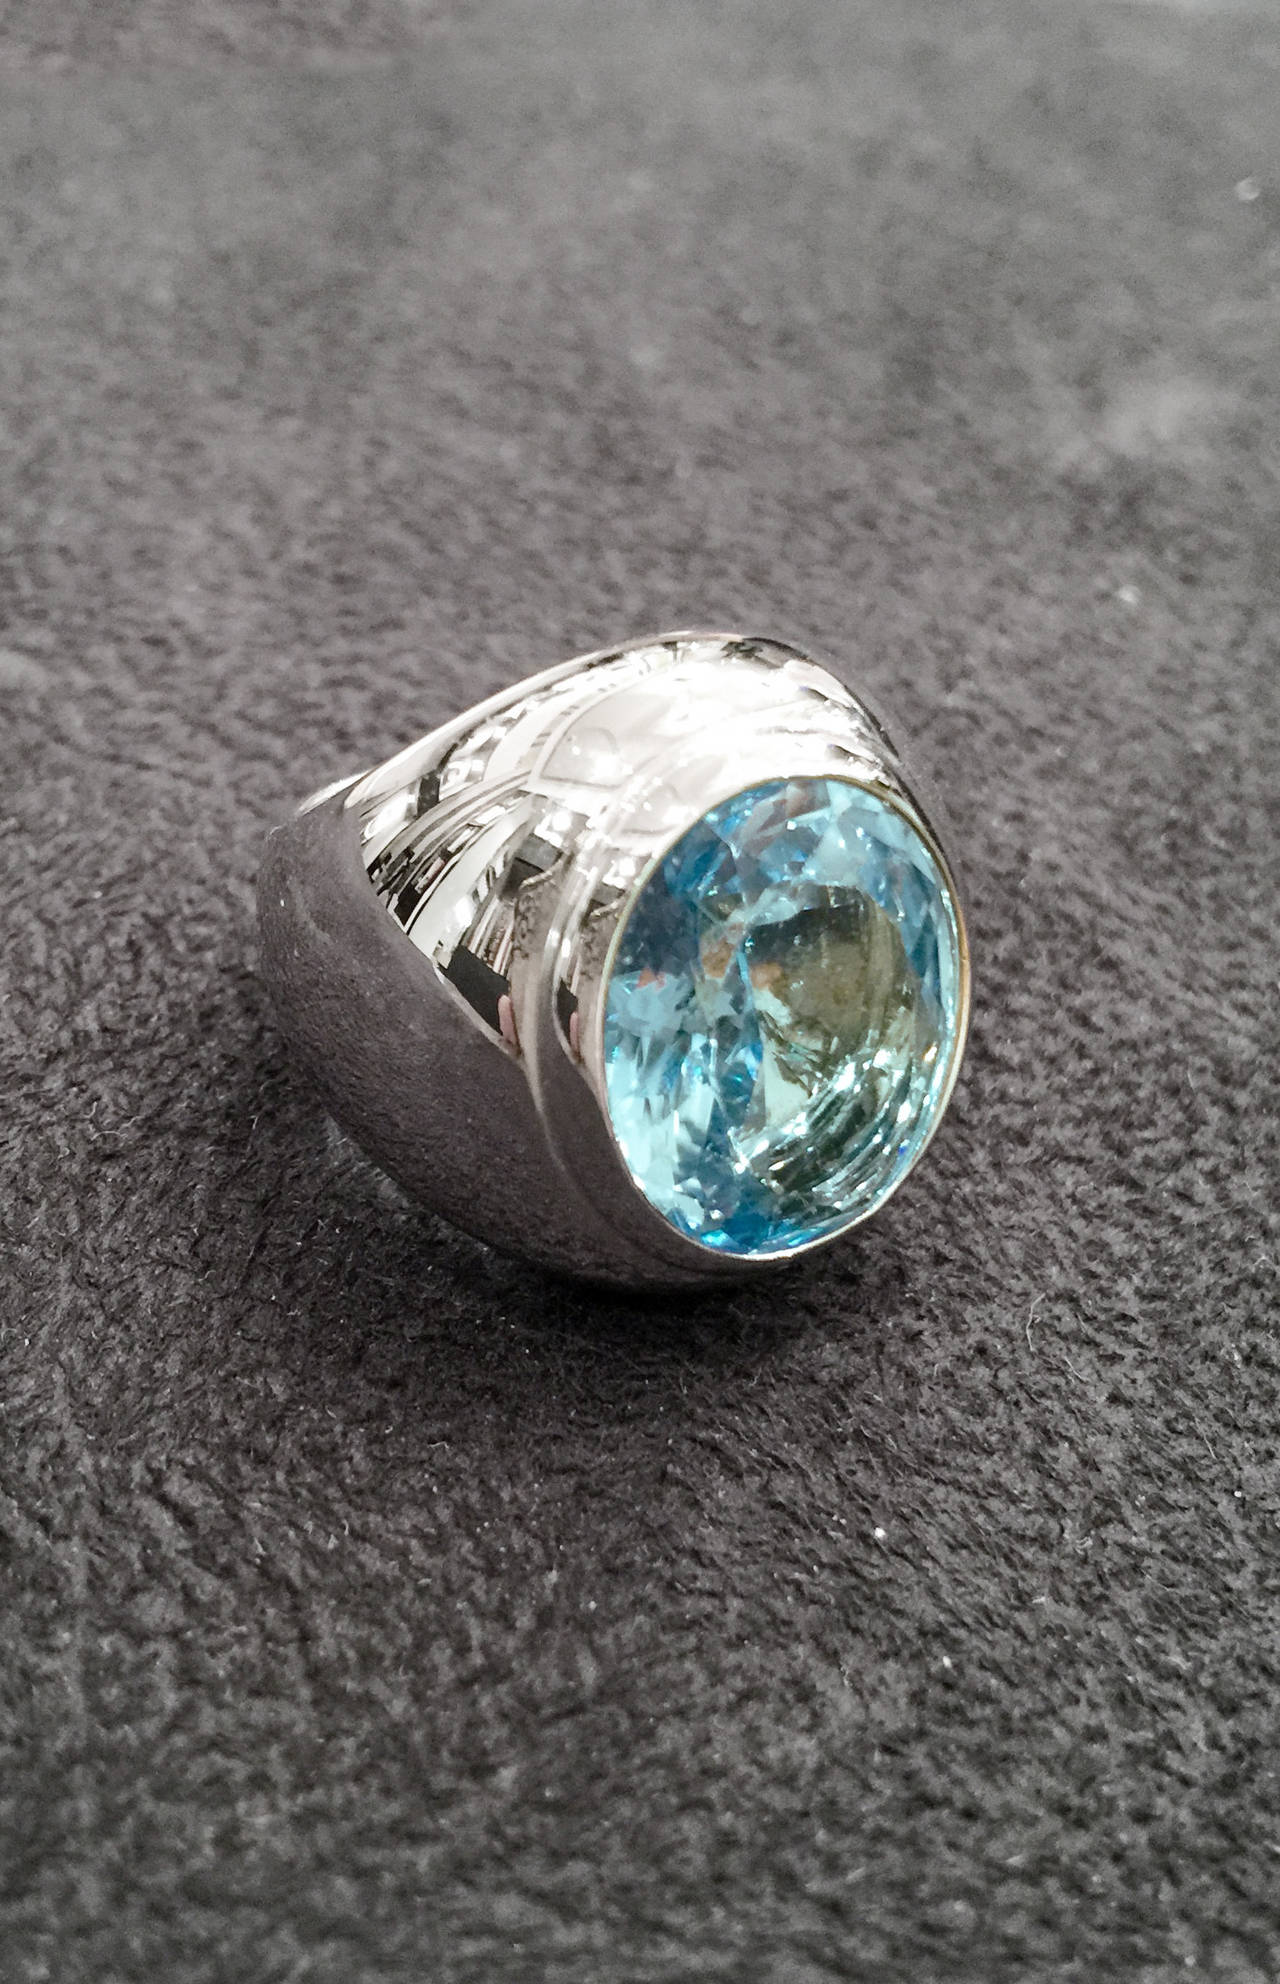 A white gold ring set with an important faceted oval blue topaz.
Signed by Cartier Paris.

Weight: 19.5 grams. Finger size: 52, can be sized.

Circa 1997.